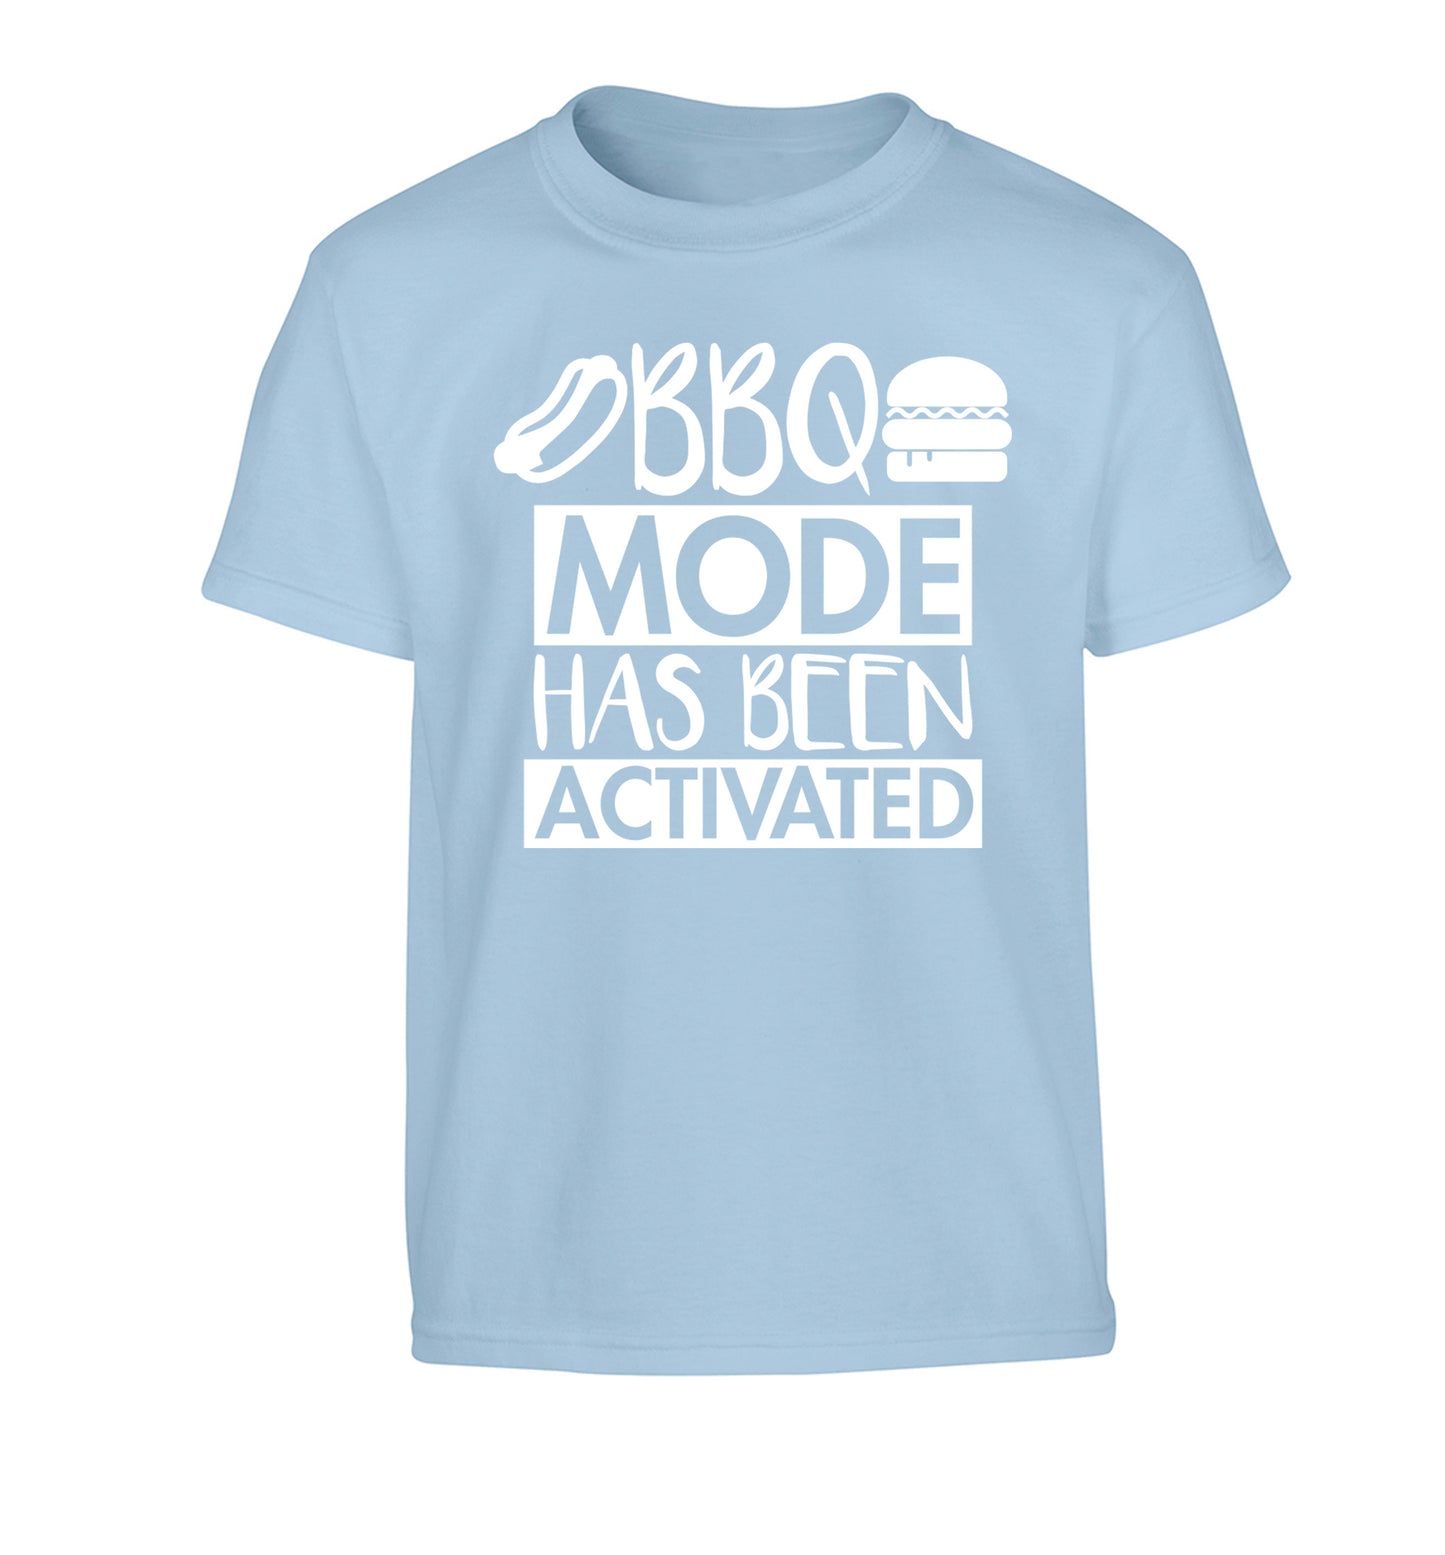 Bbq mode has been activated Children's light blue Tshirt 12-14 Years